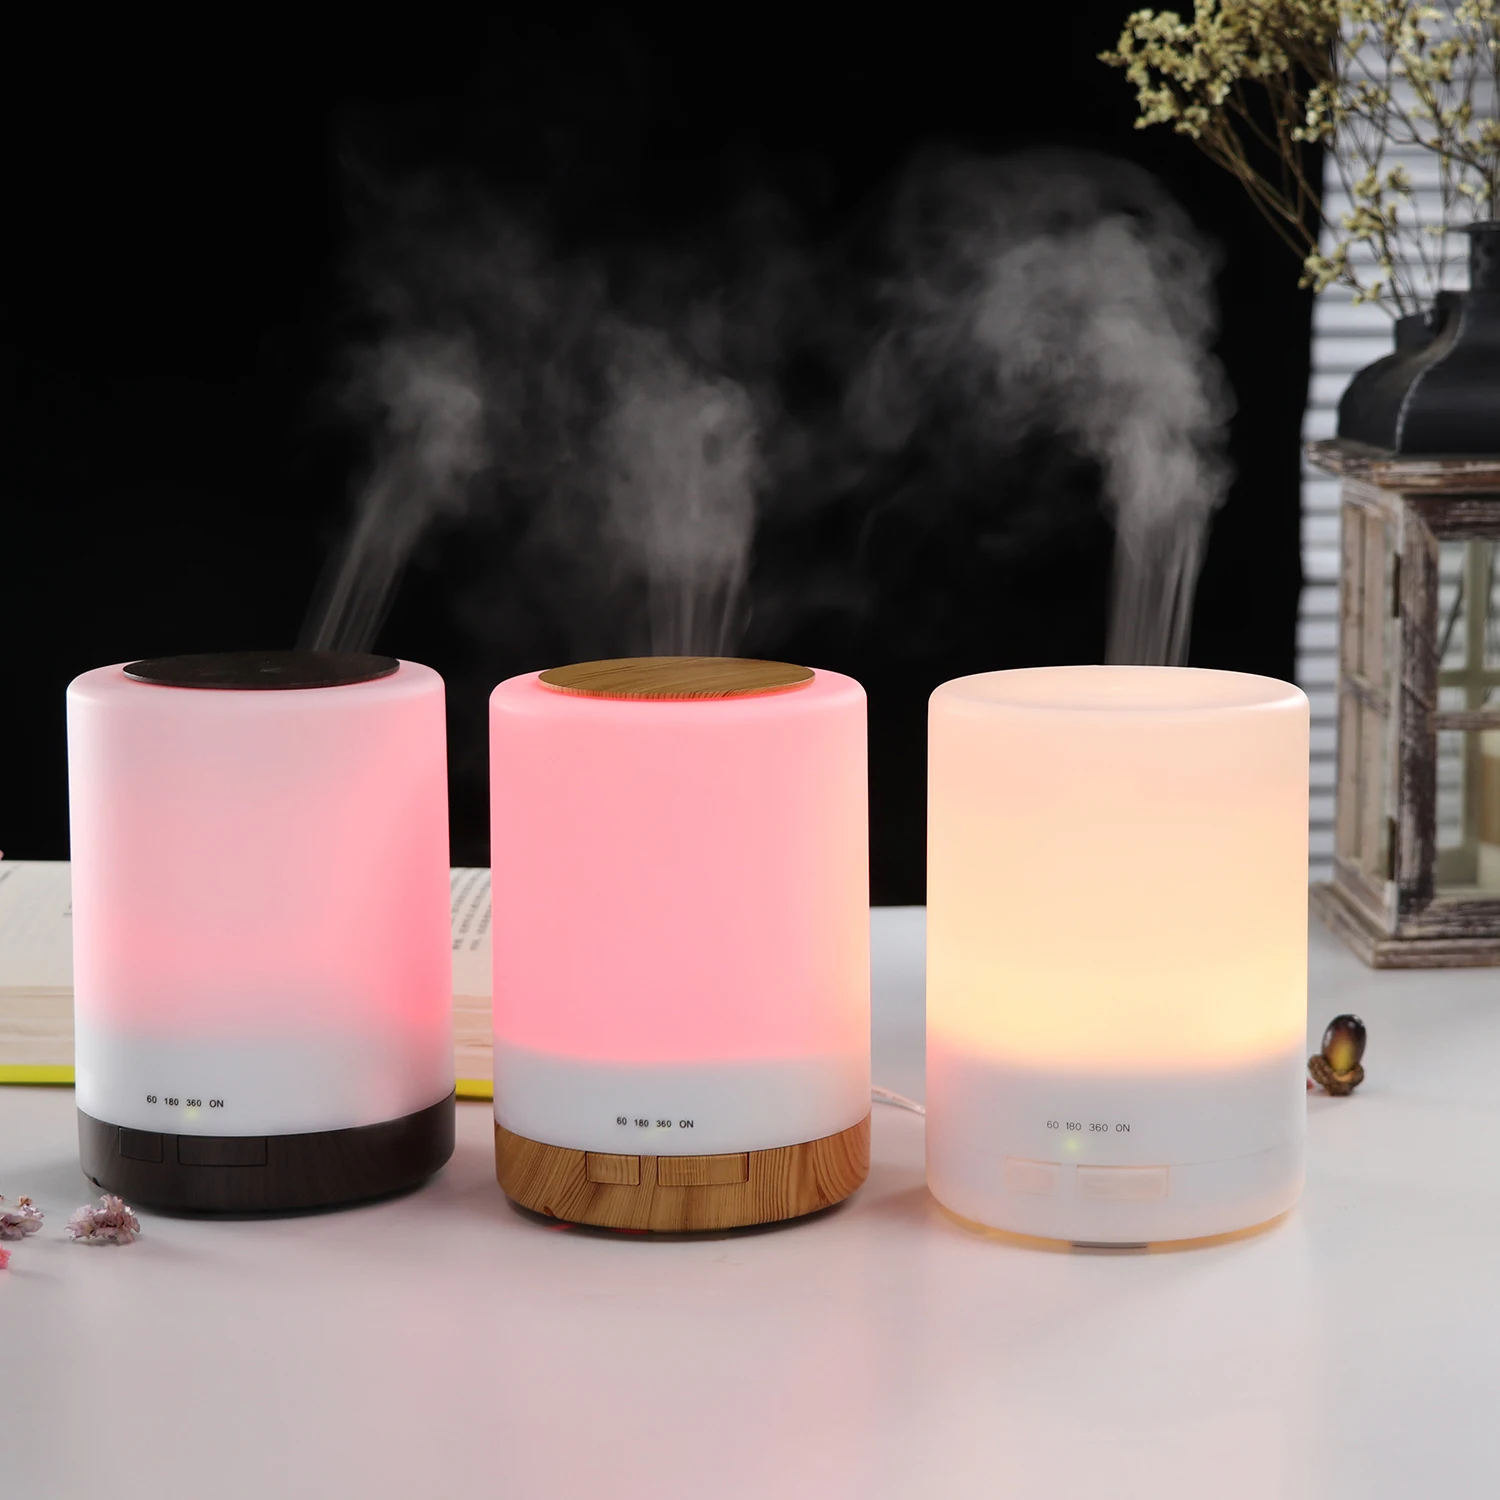 Hot Sale 300ml Remote Control Ultrasonic Air Aroma Humidifier Essential Oil Diffuser With 7 Color LED Lights For Office And Home